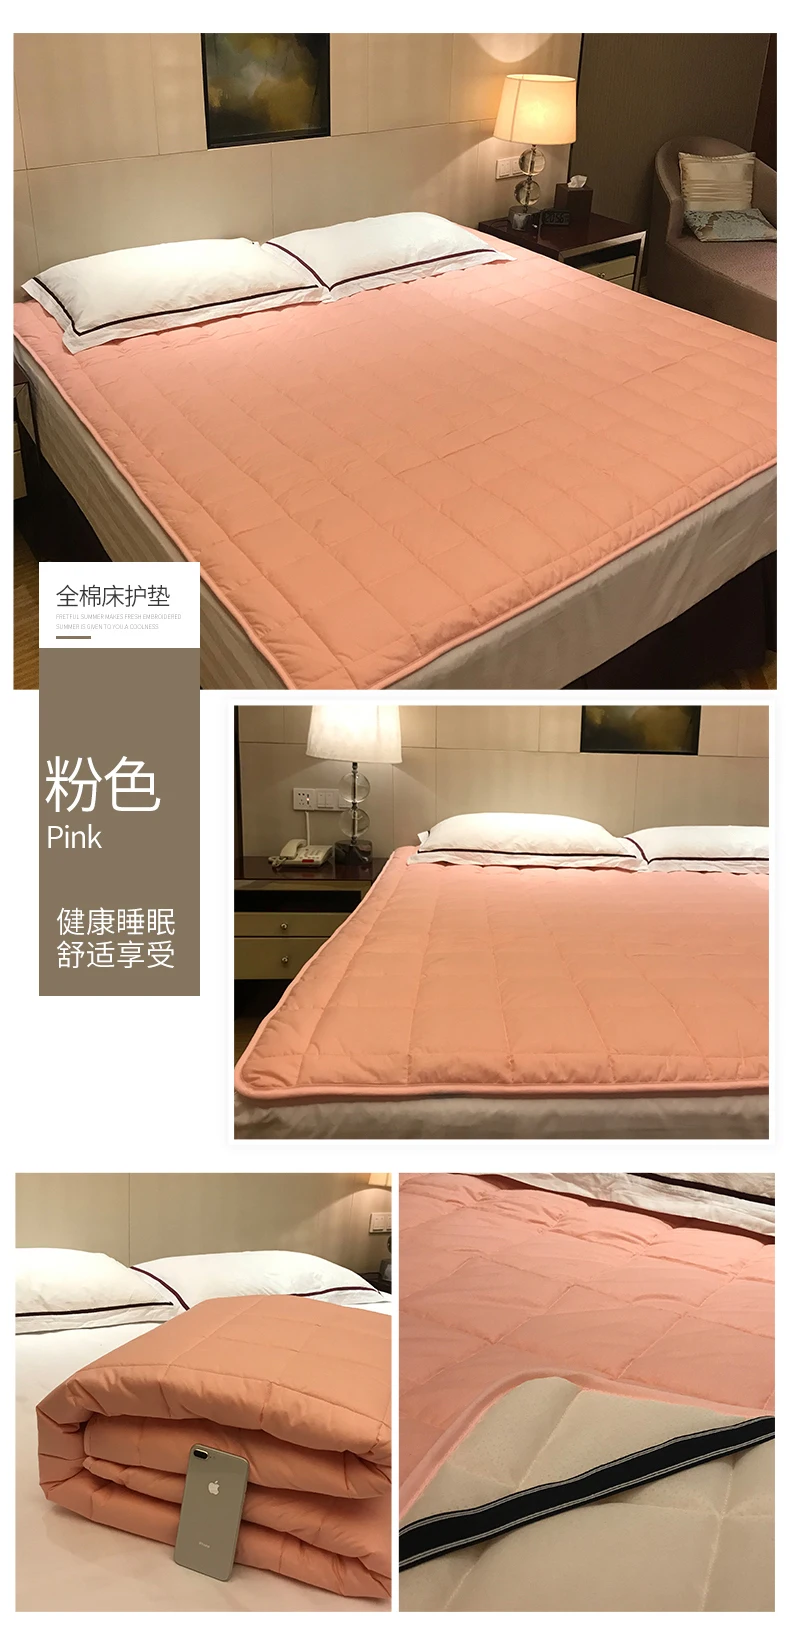 Mattress Foldable Single double Mattresses Cotton Cover King Queen Size Resilience soft bed Mattress Tatami Flooring Mat